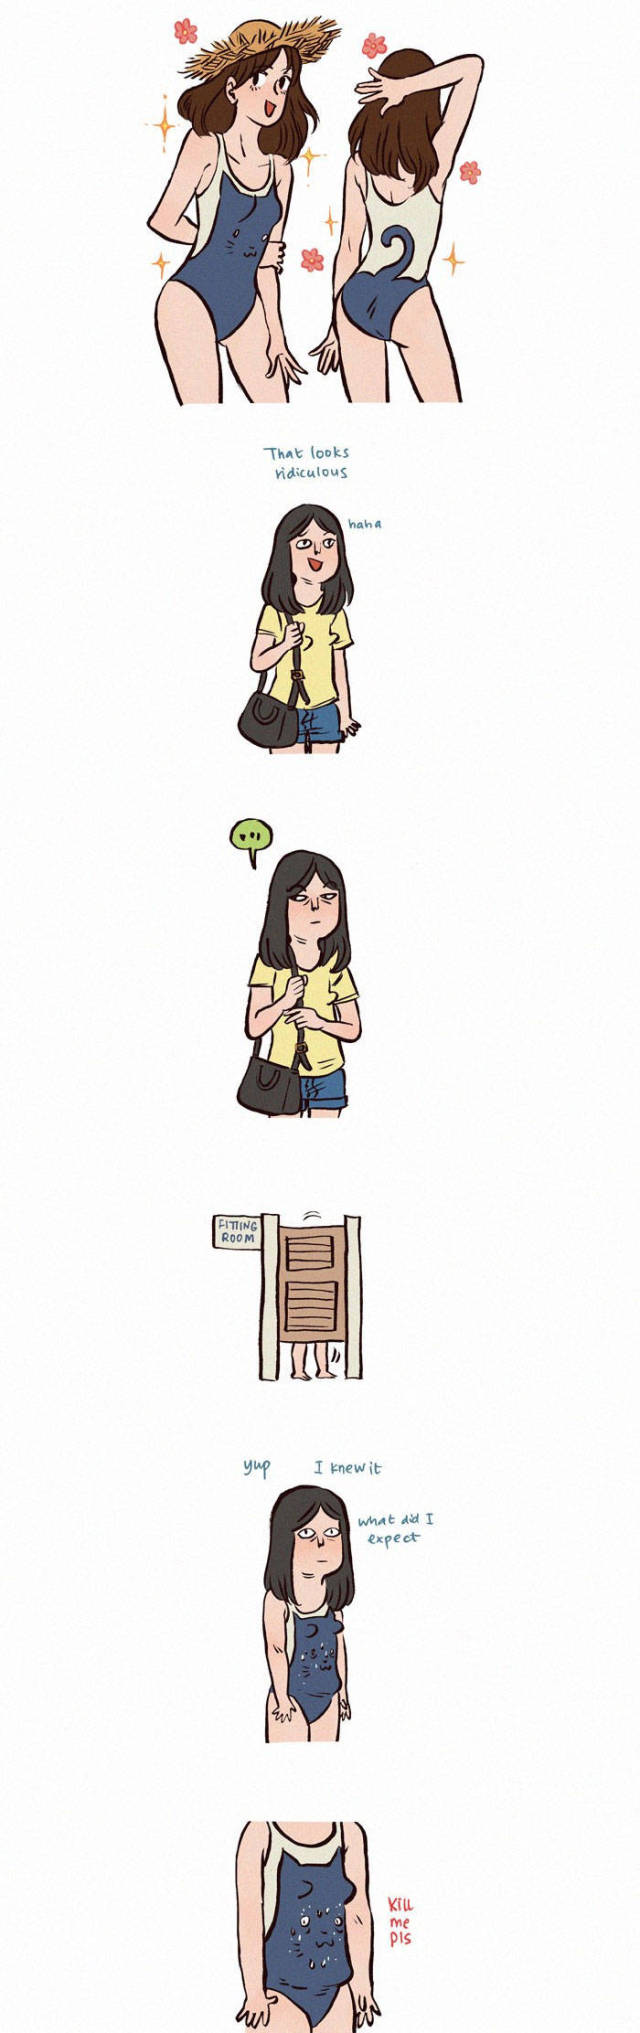 Comics That Explain What Life Is Like With A Boyfriend That's A Giant And A Nerd (42 pics)